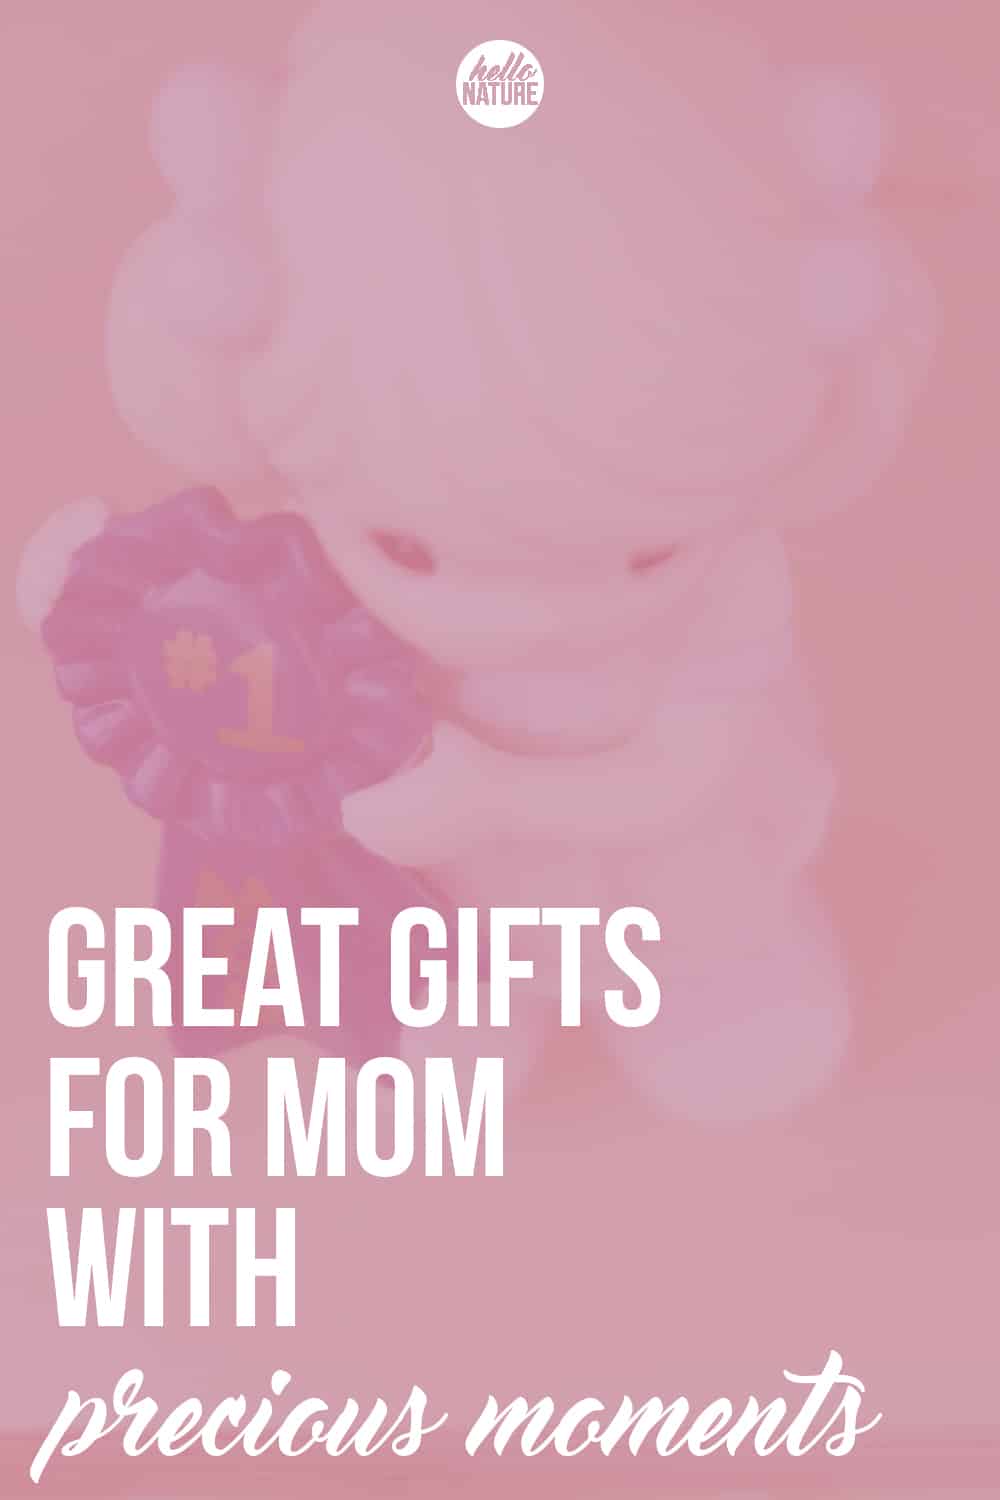 Need a gift for mom that she'll remember forever? Show her how much you appreciate her with a gift from Precious Moments!